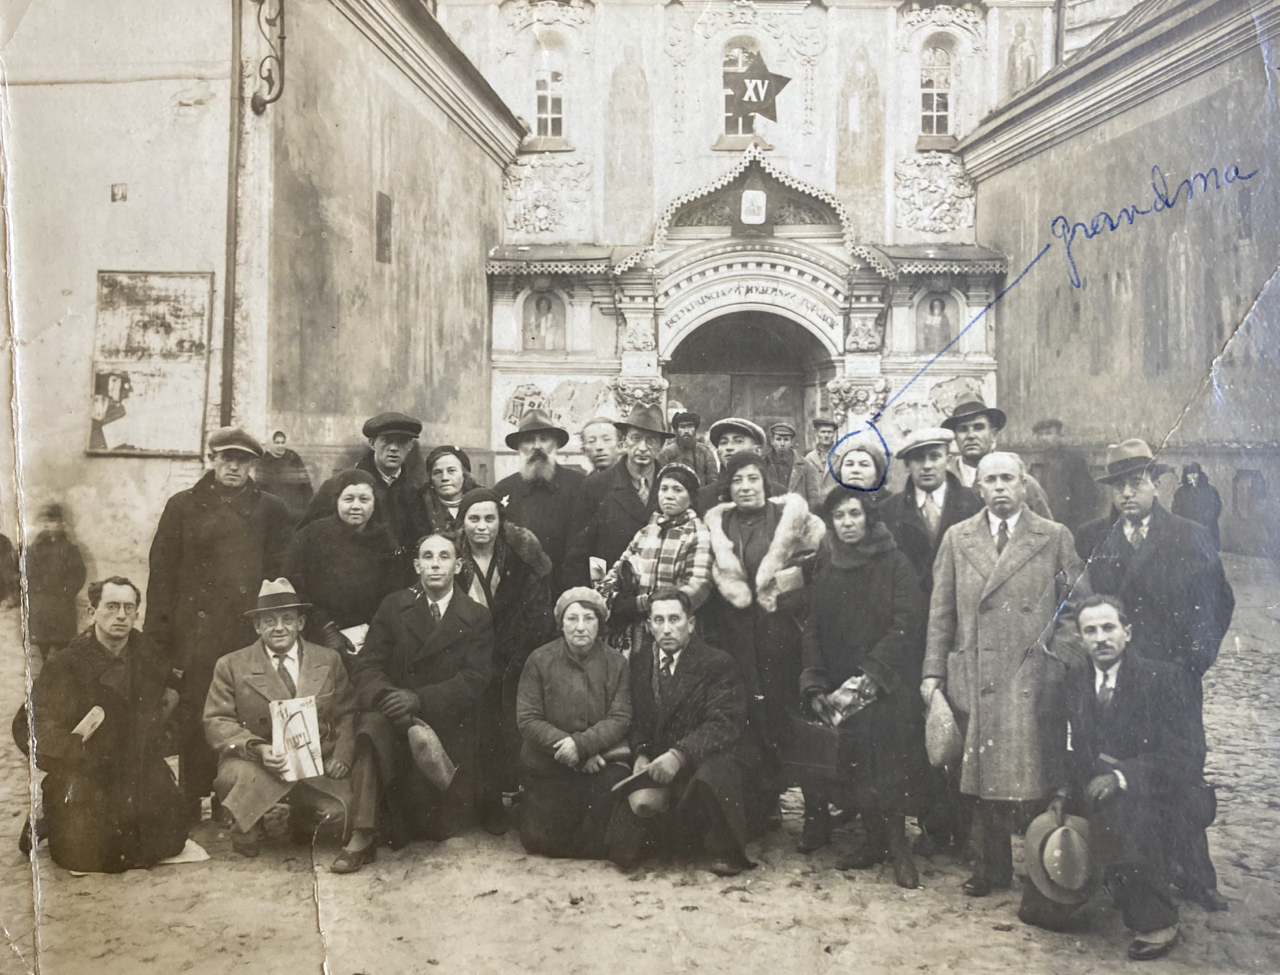 Group photo of about 25 people, in coats, posing in front of an ornate building; Sonia is circled; handwriting says 